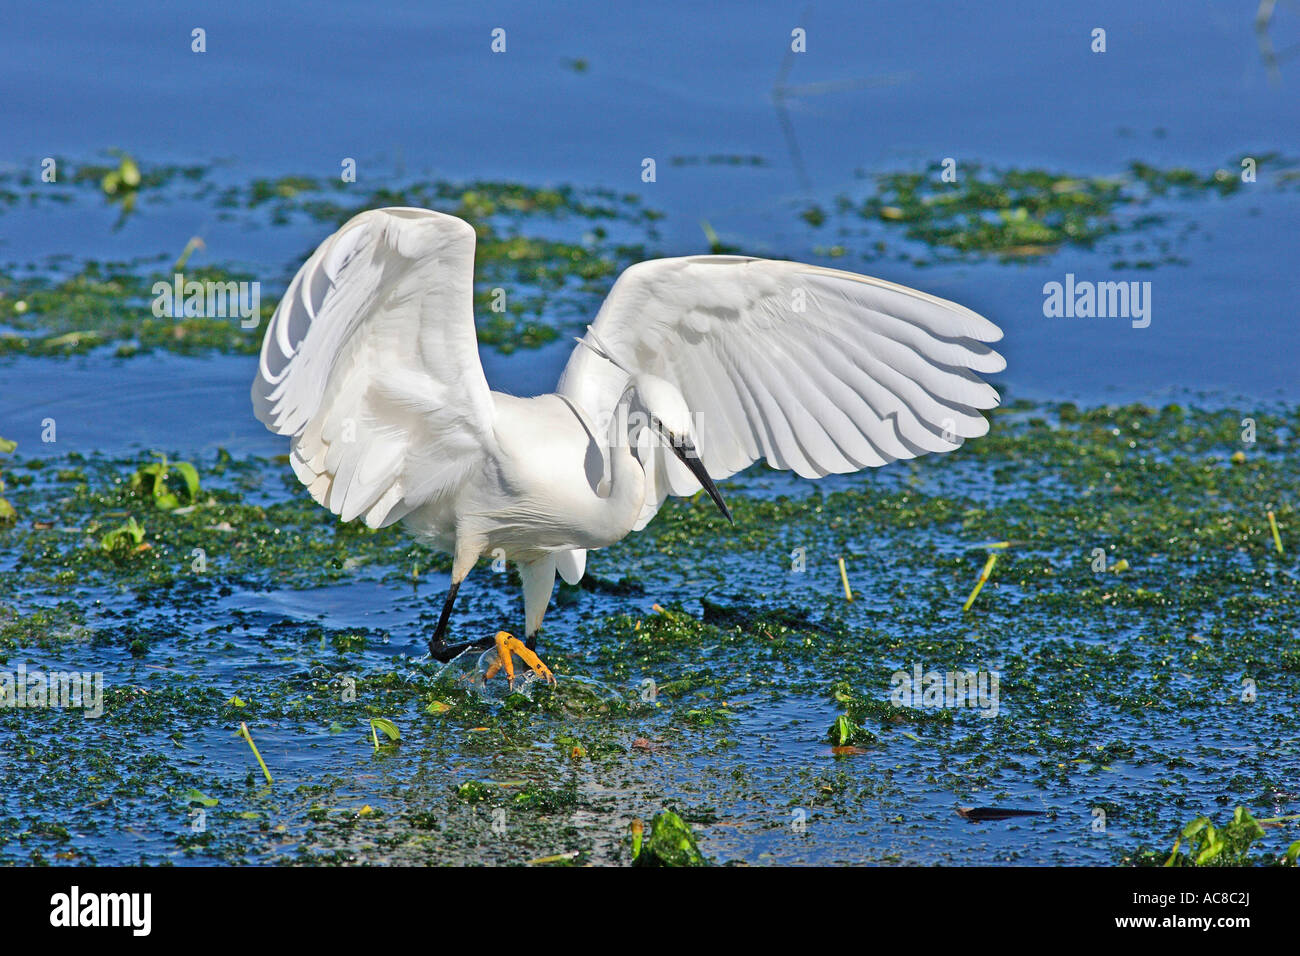 Little Egret with wings outstretched as it closes in on fish Stellenbosch, Western Cape; South Africa Stock Photo